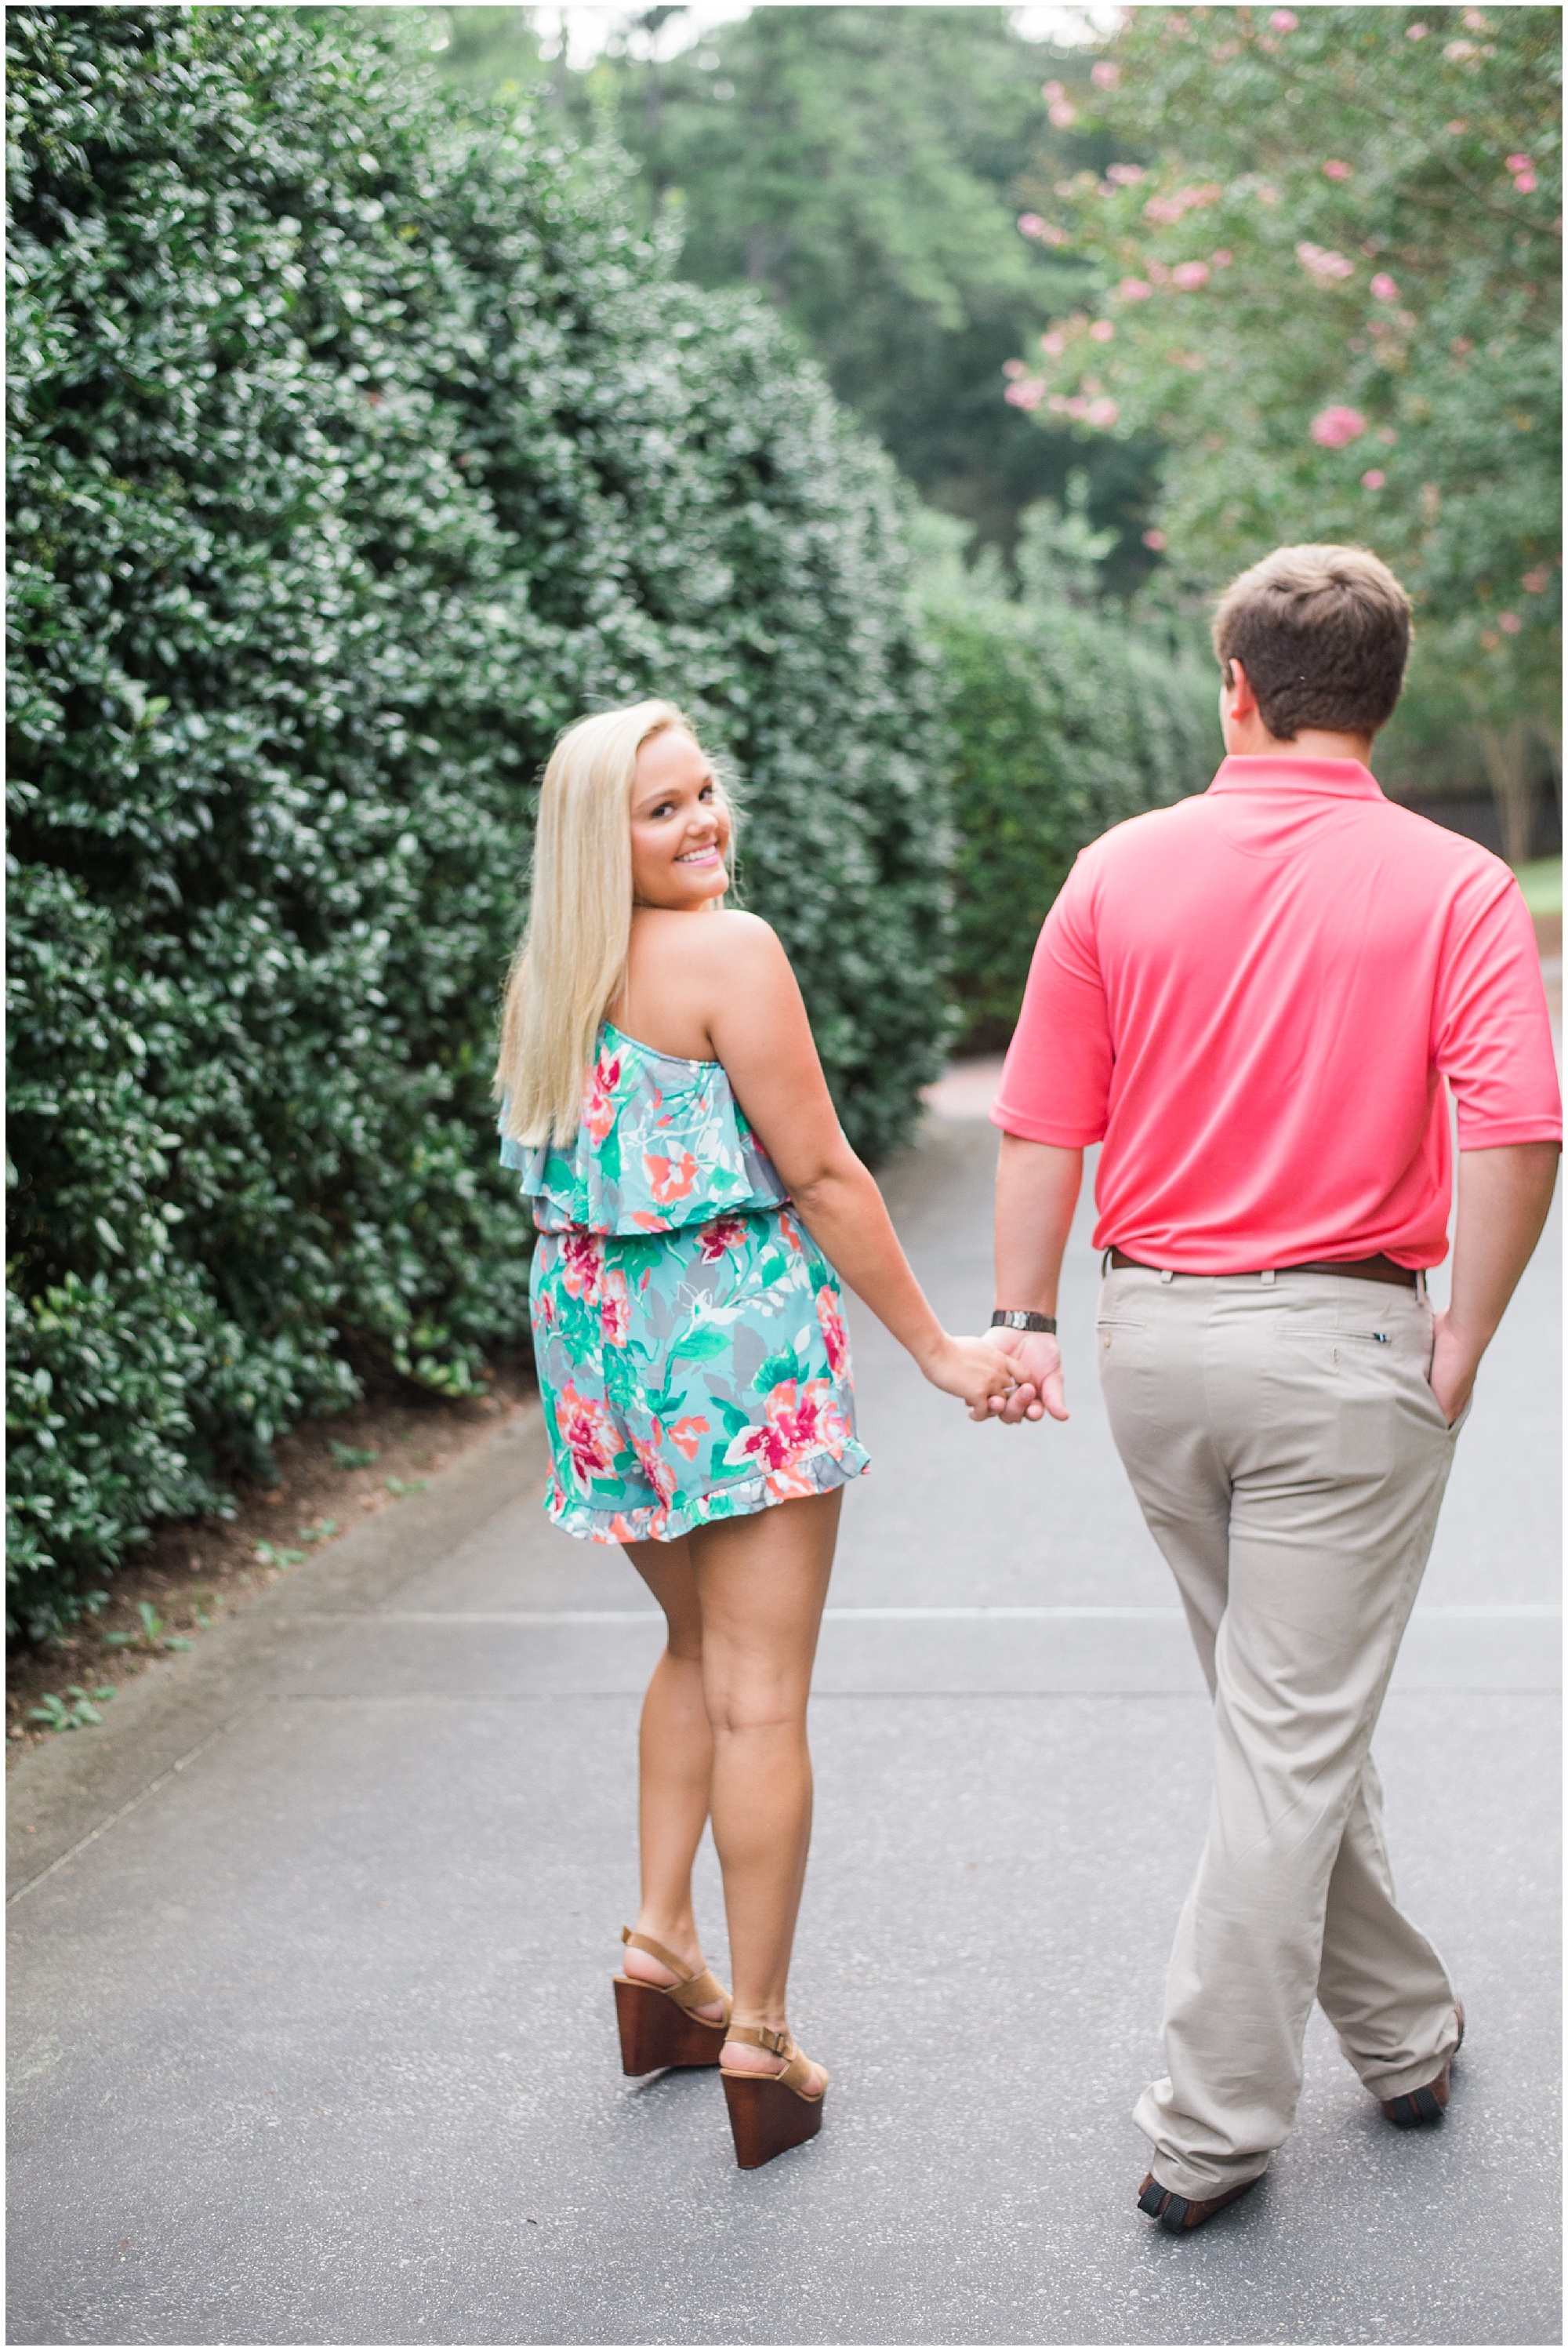 Allie and Channing || Wedding Photographer || Engagement Session in Greenhouse and Gardens|| Mountain Brook and Birmingham, AL